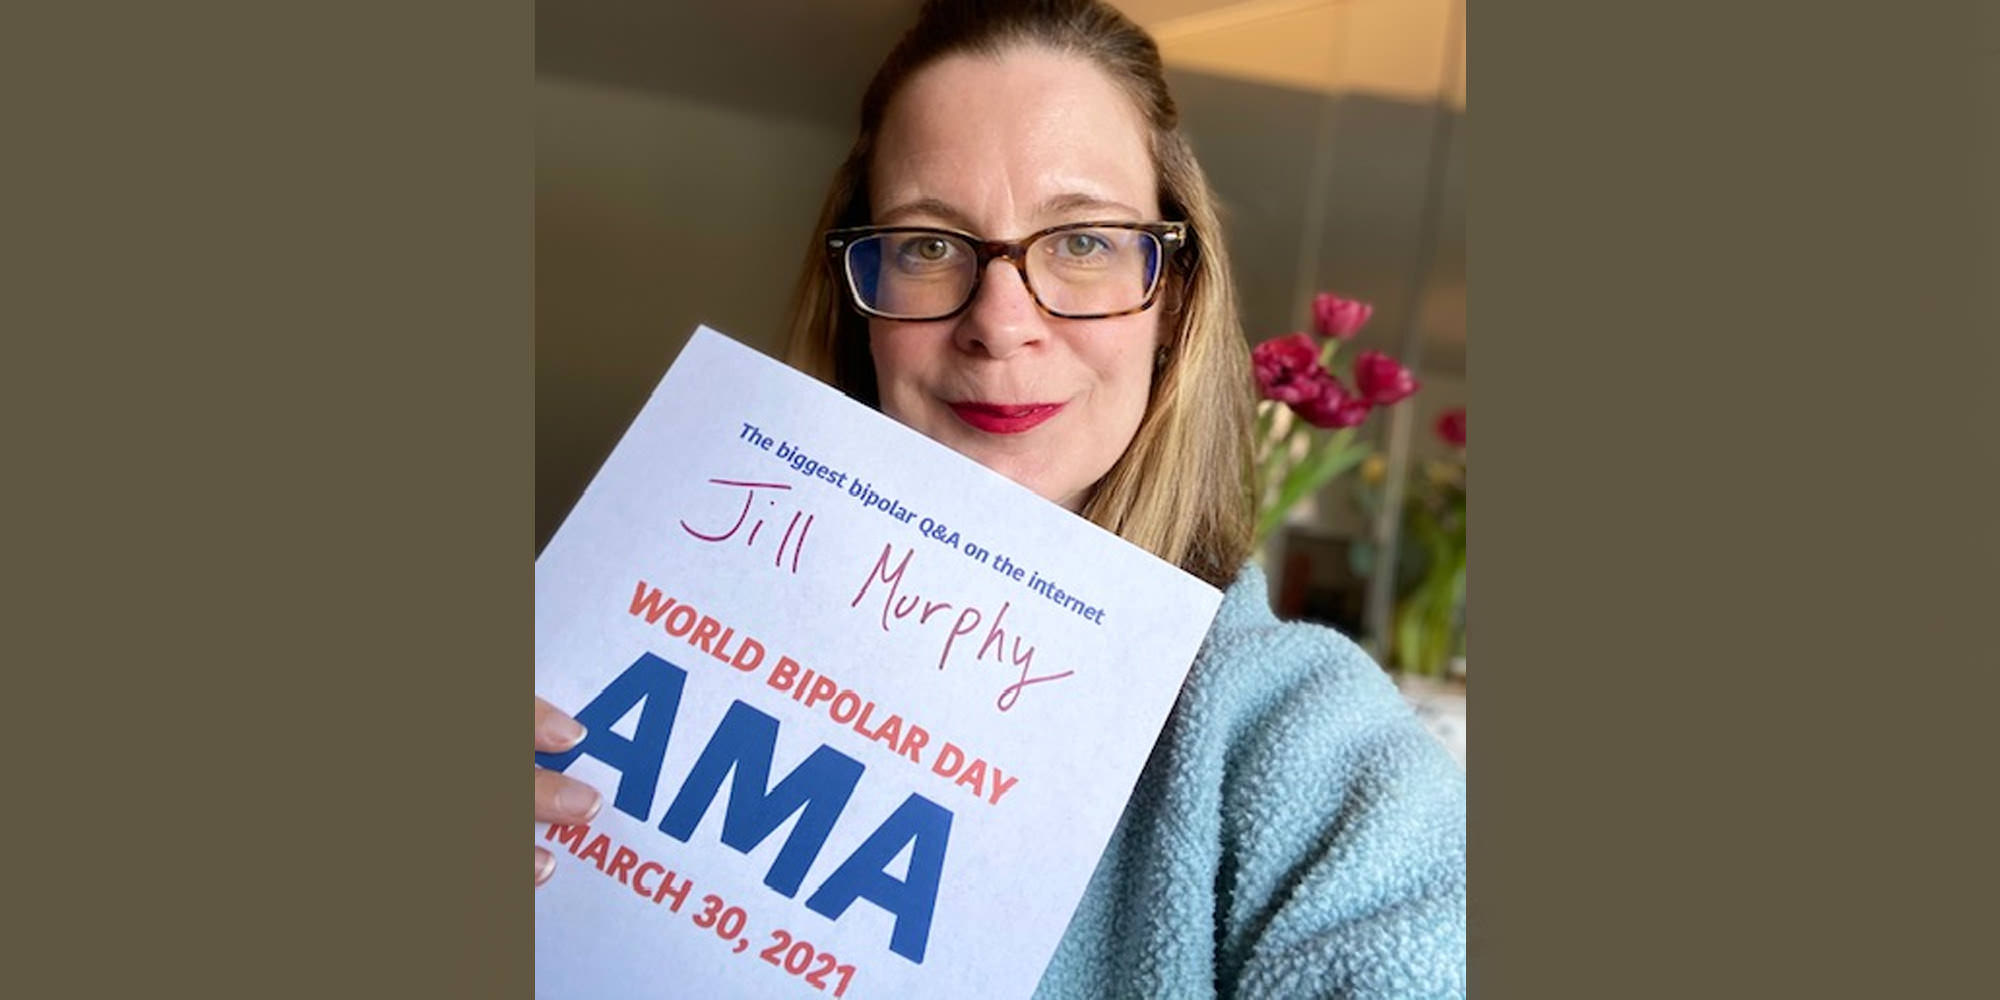 Jill is standing in a room with a large mirror and red tulips. She is Caucasian, has shoulder-length ombred hair, and is wearing thick-rimmed tortoiseshell glasses and a fuzzy light blue sweater. She is holding the AMA proof sign.